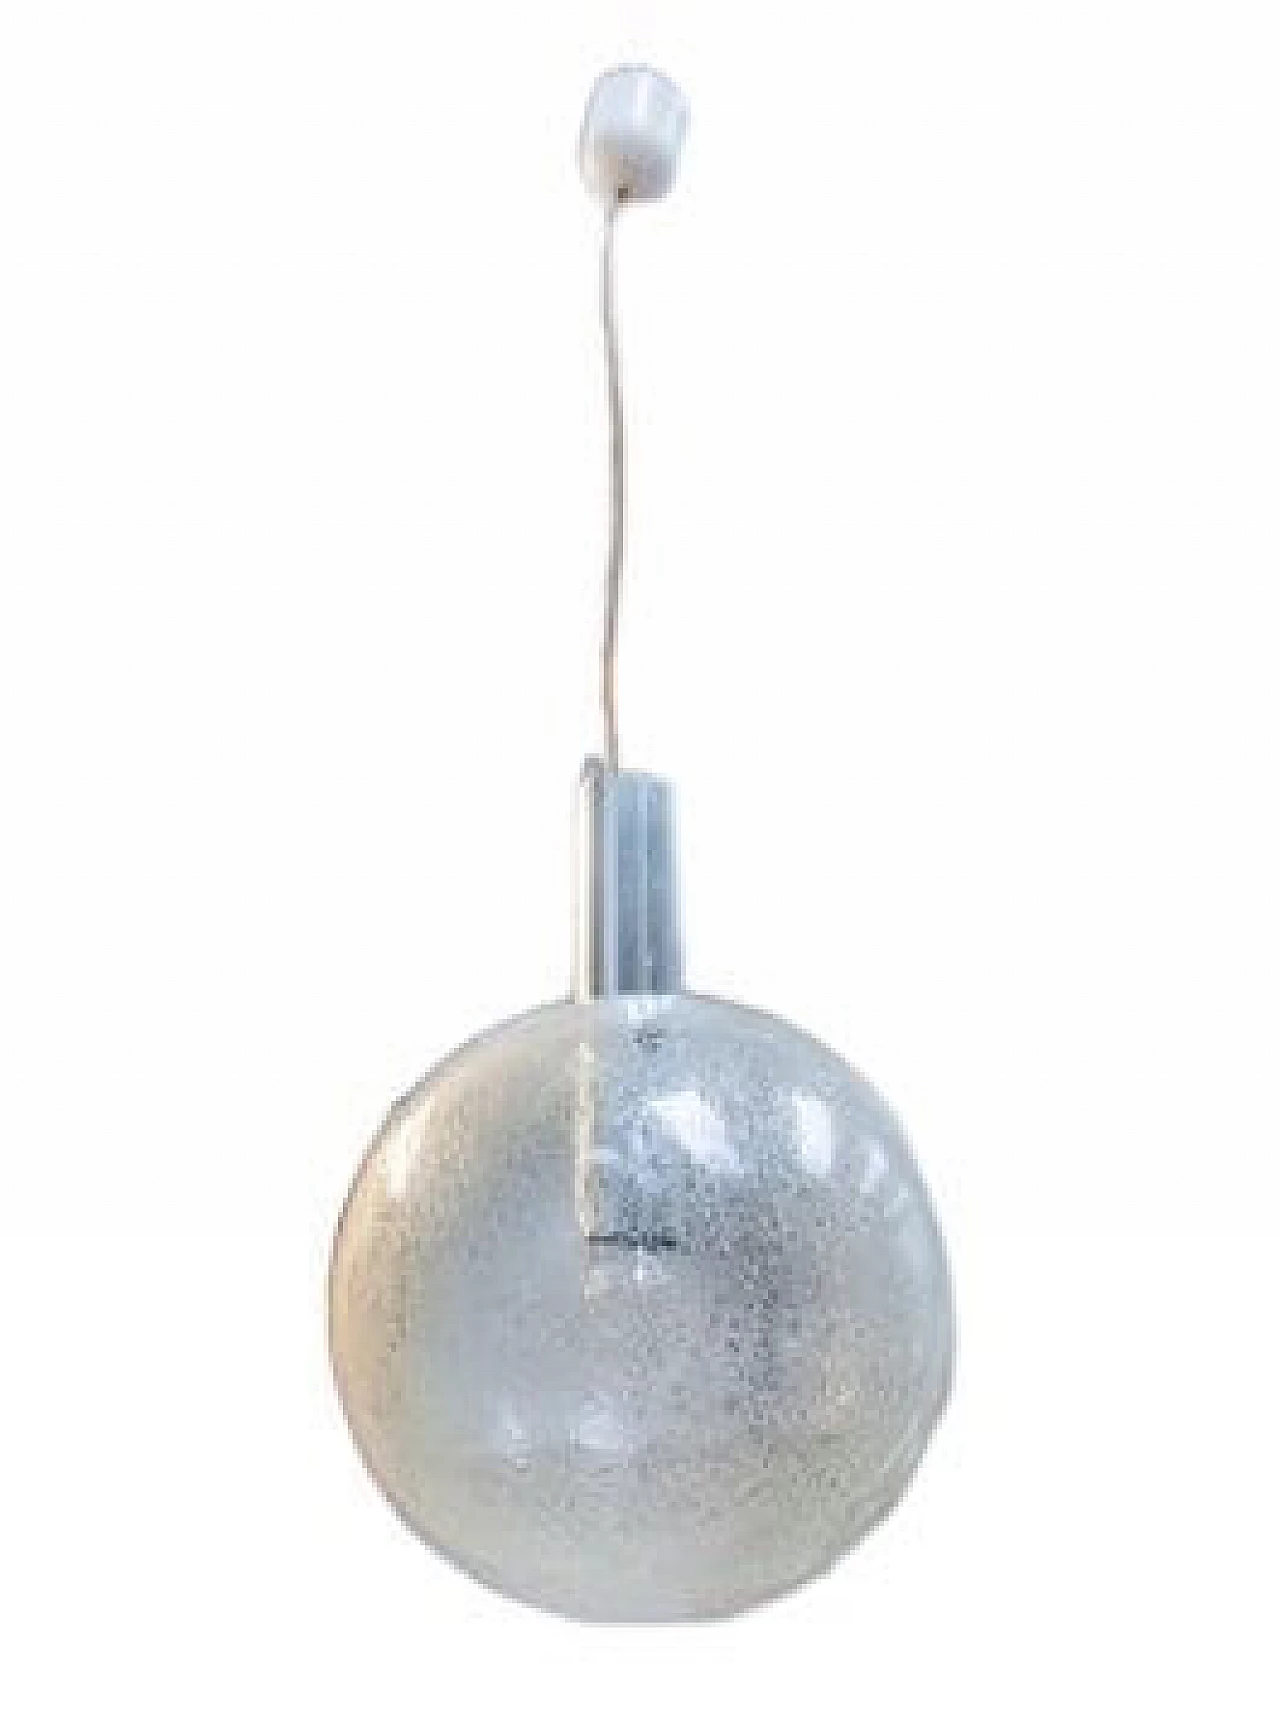 Murano glass Sfera ceiling lamp by Tobia Scarpa for Flos, 1964 8